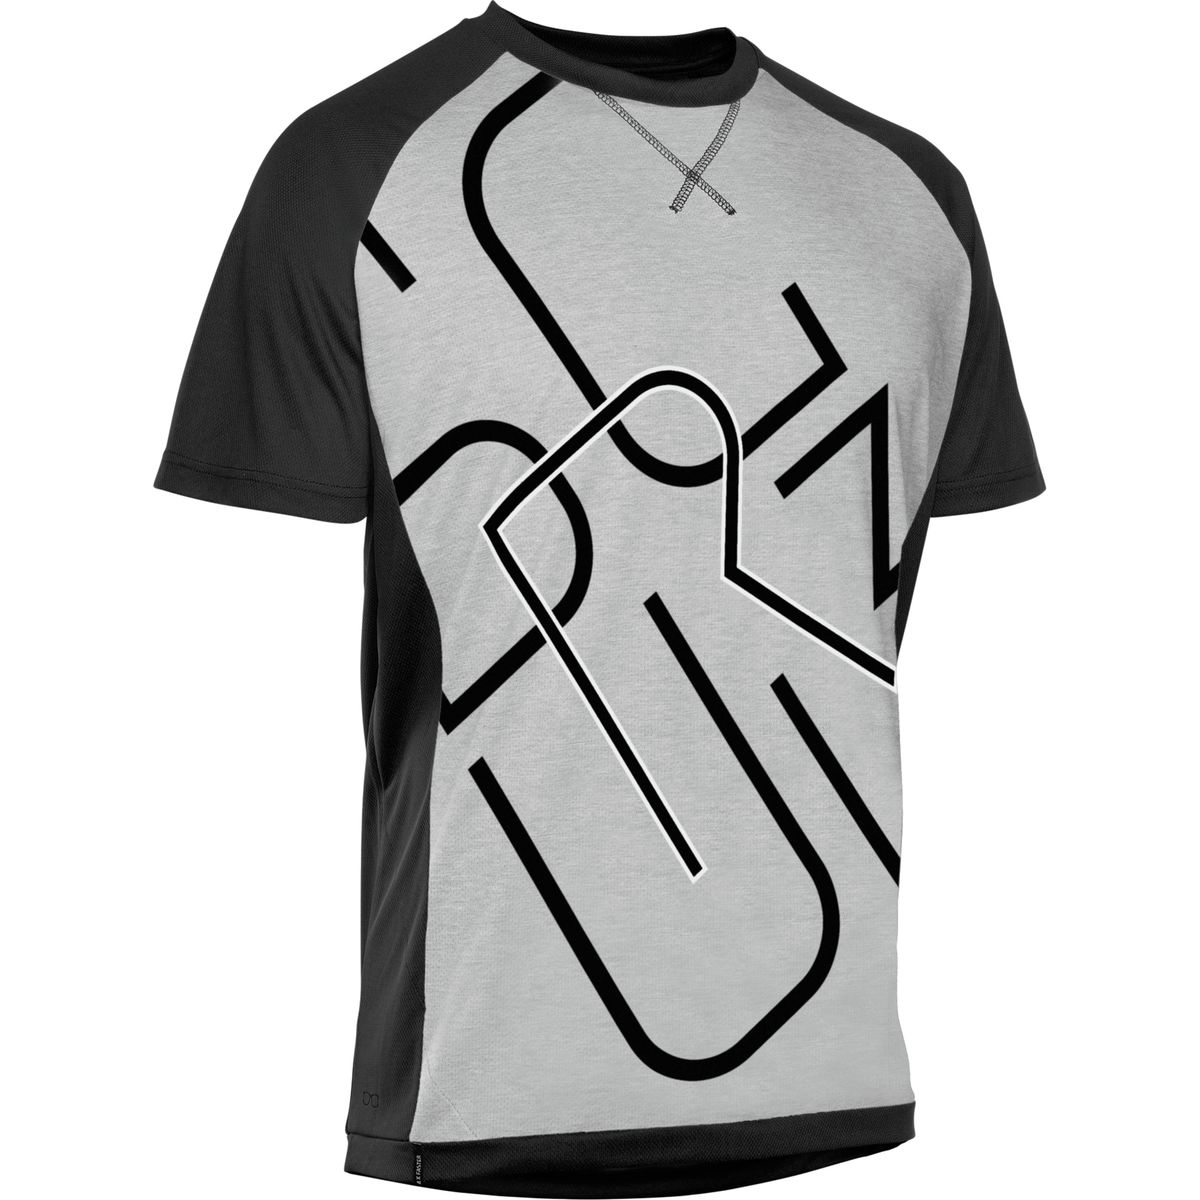 ION Letters Scrub AMP Short-Sleeve Jersey - Men's